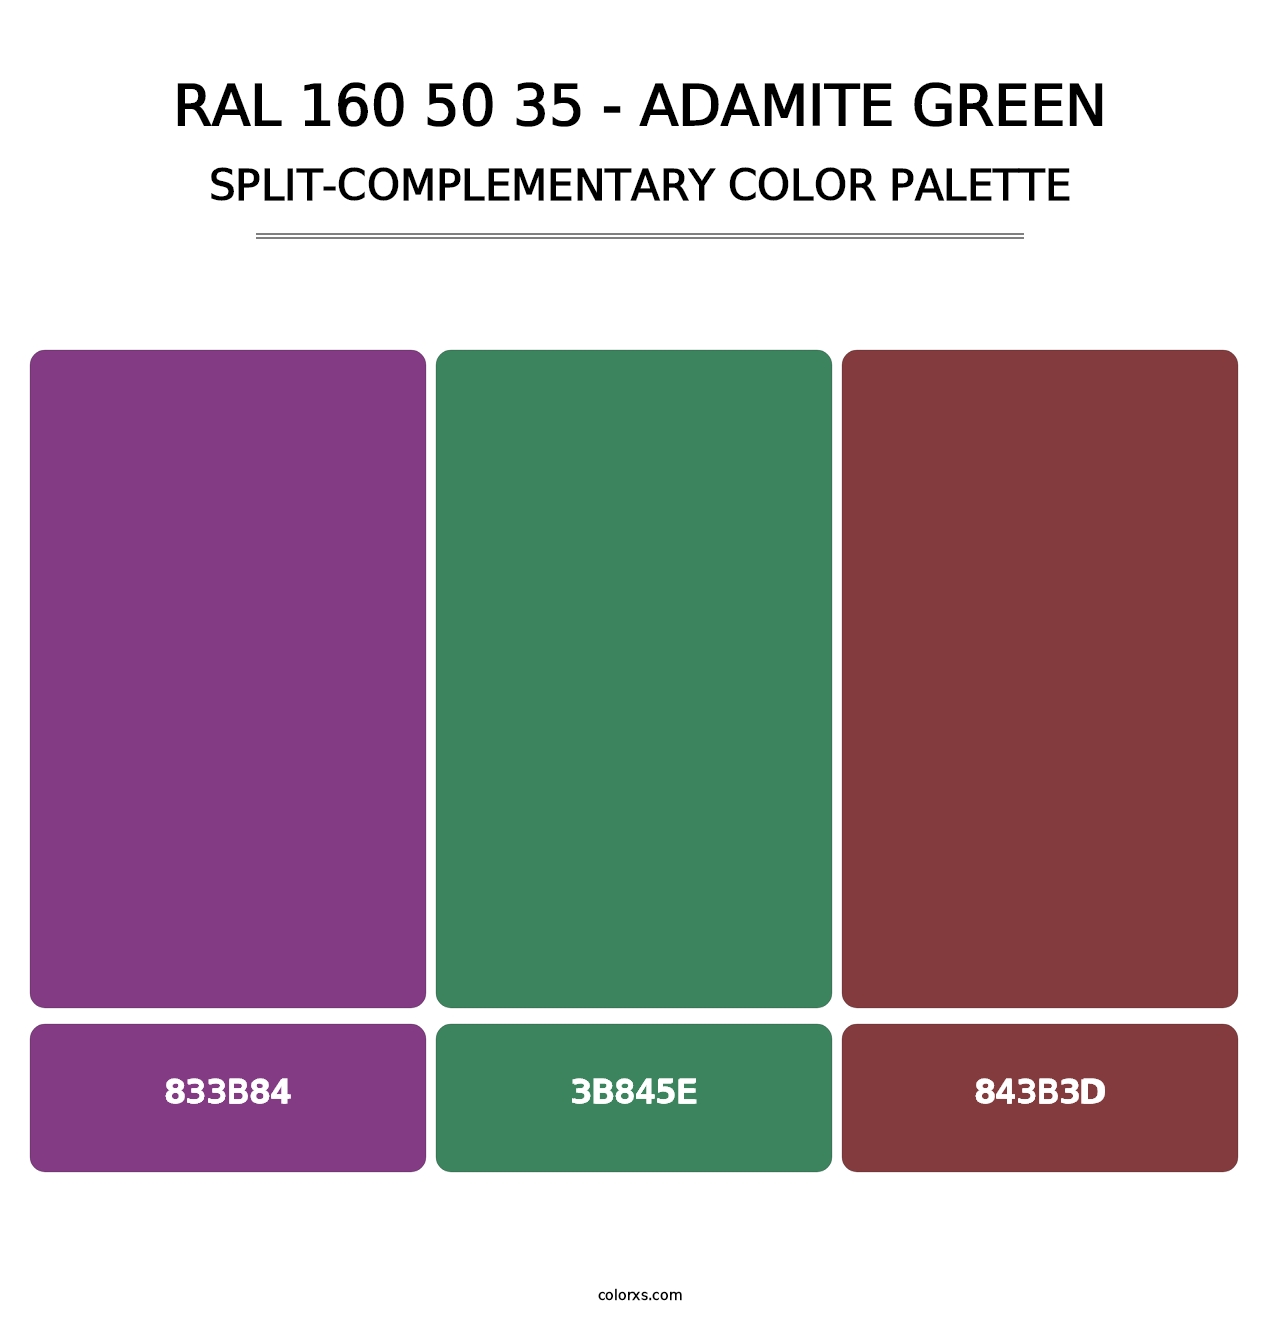 RAL 160 50 35 - Adamite Green - Split-Complementary Color Palette